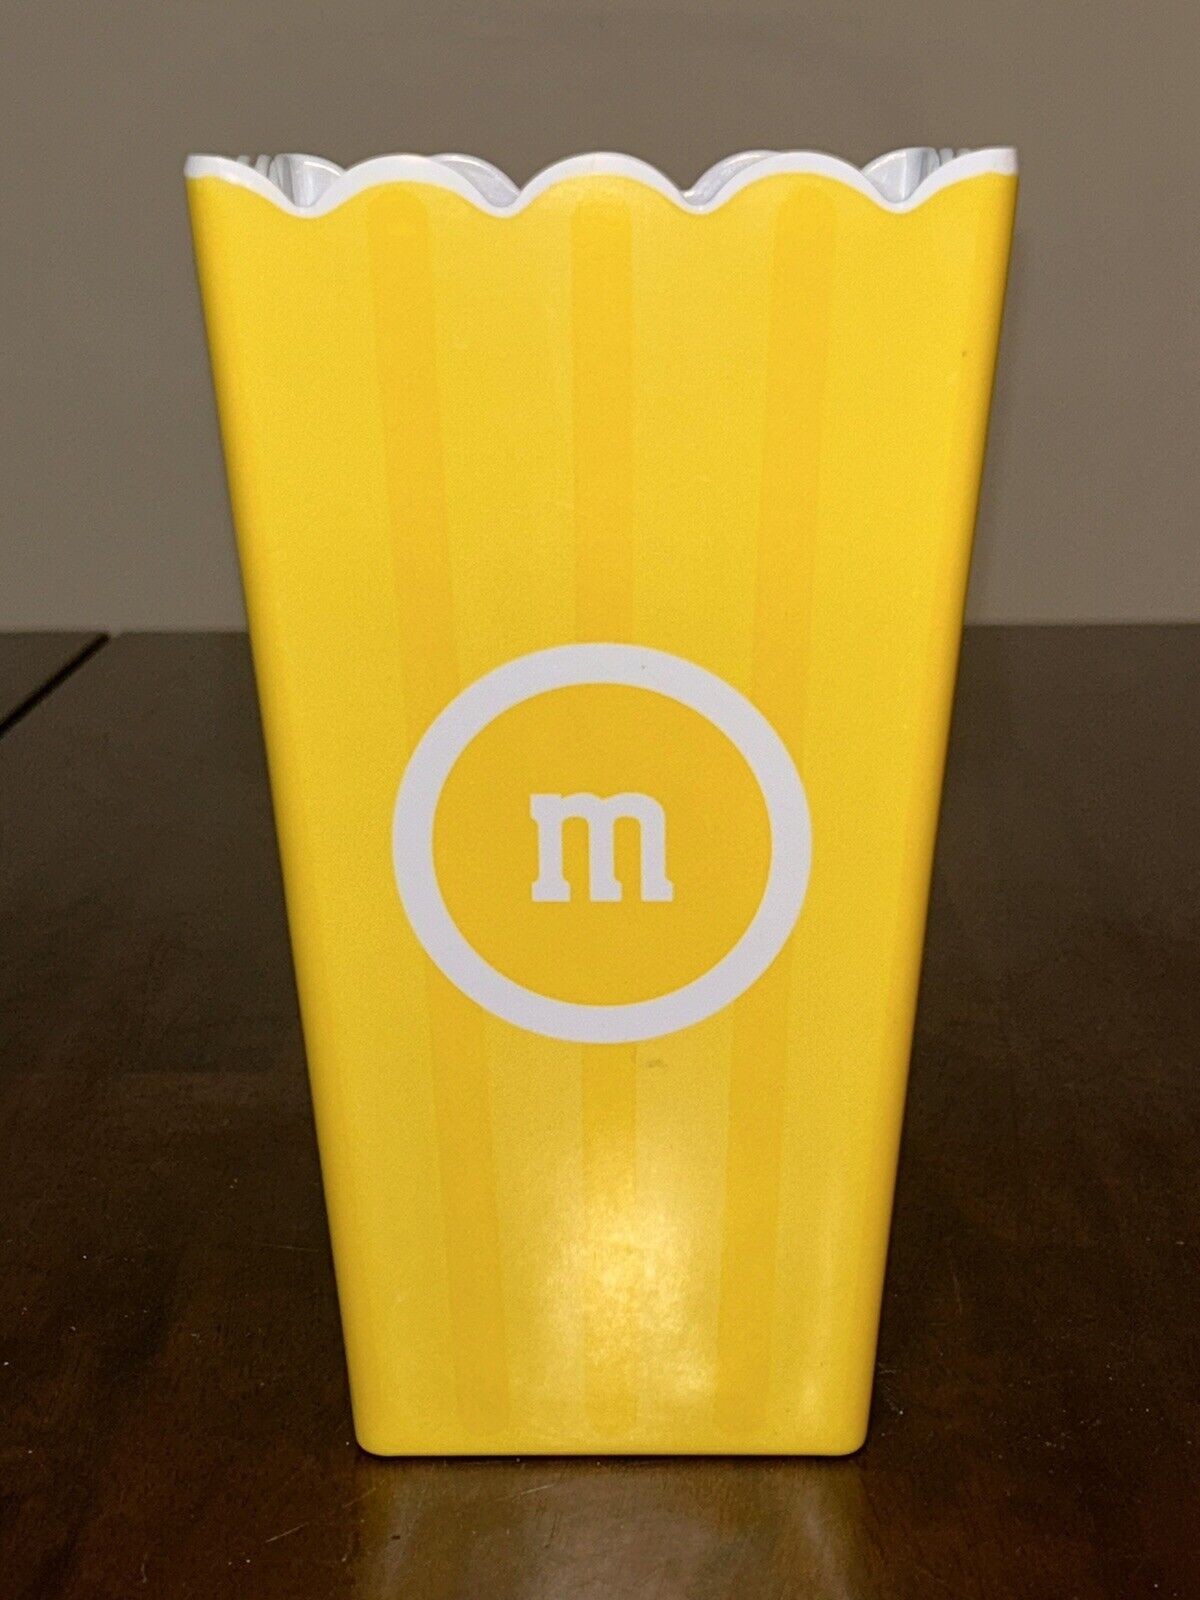 M&M World Candy Character Popcorn Bucket Tub Container Yellow 2020